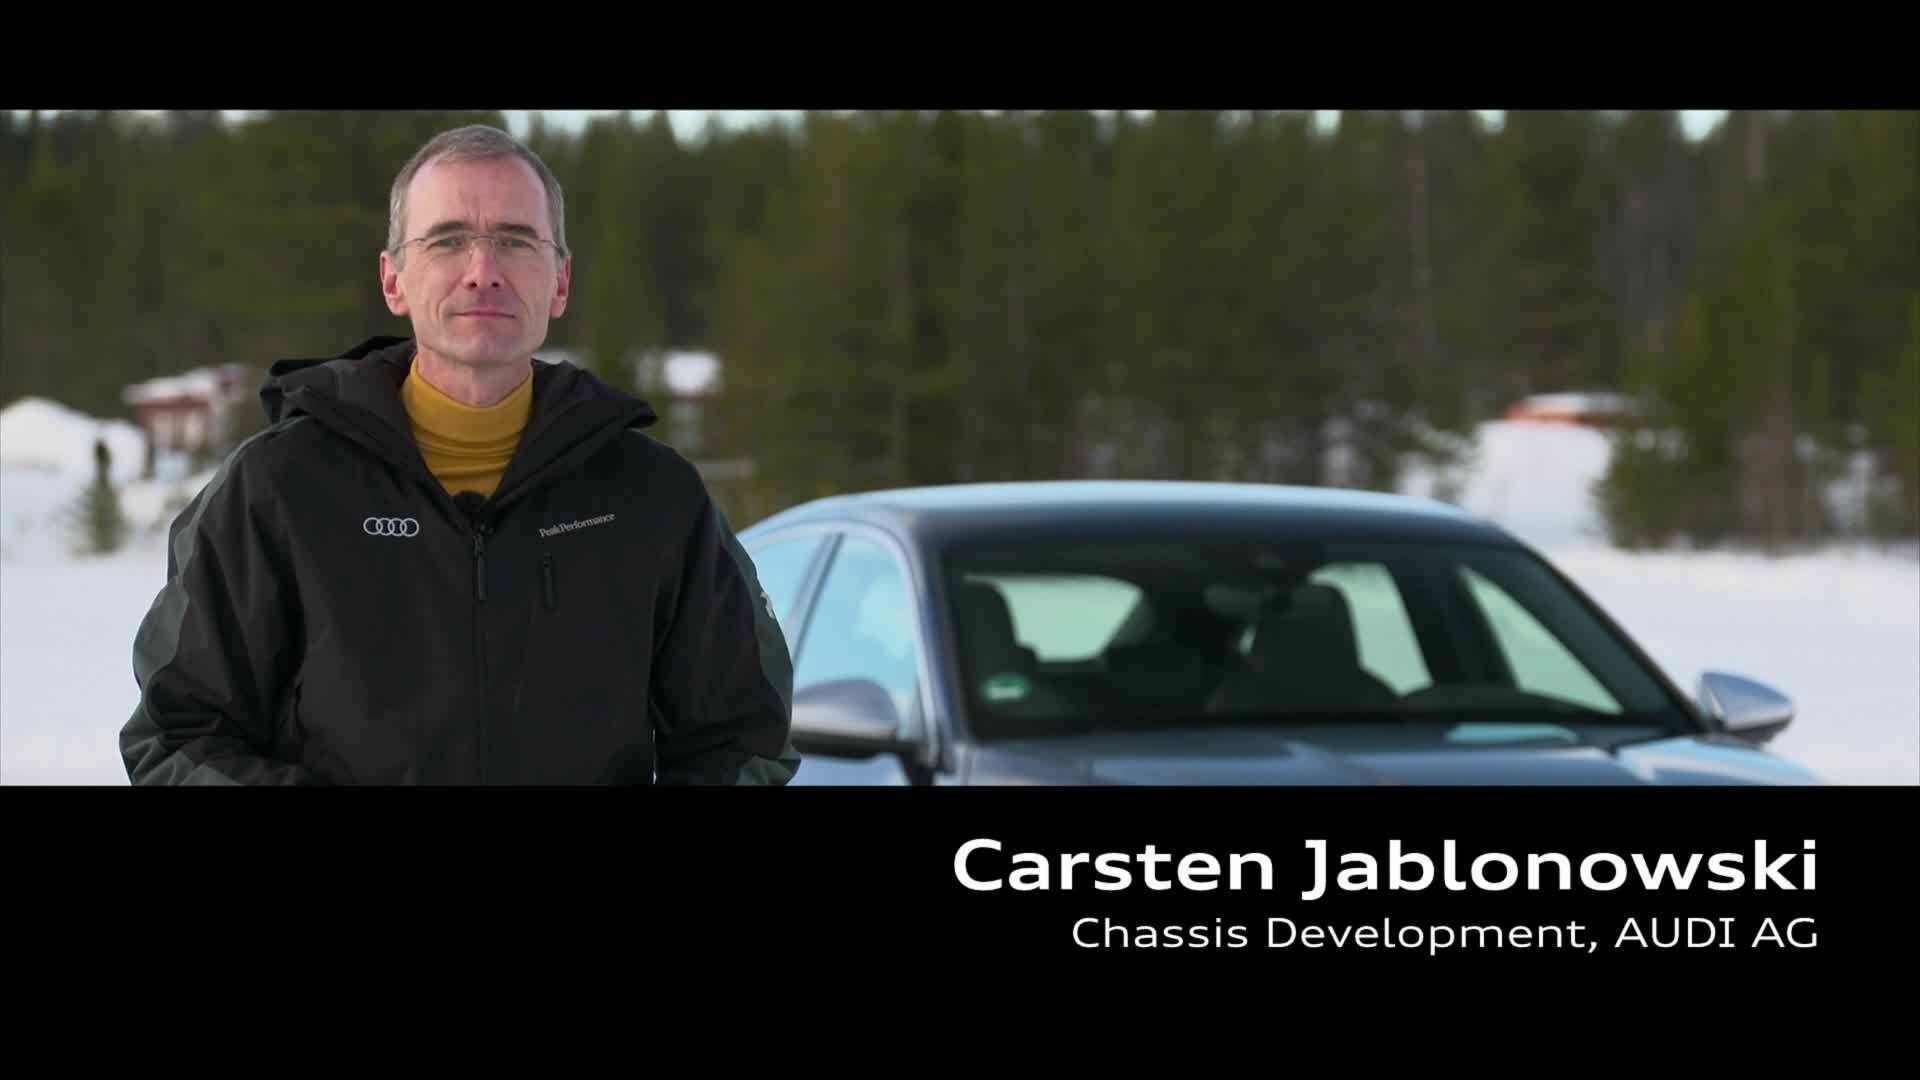 Footage: Interview on the Audi Winter Experience Drive with Carsten Jablonowski